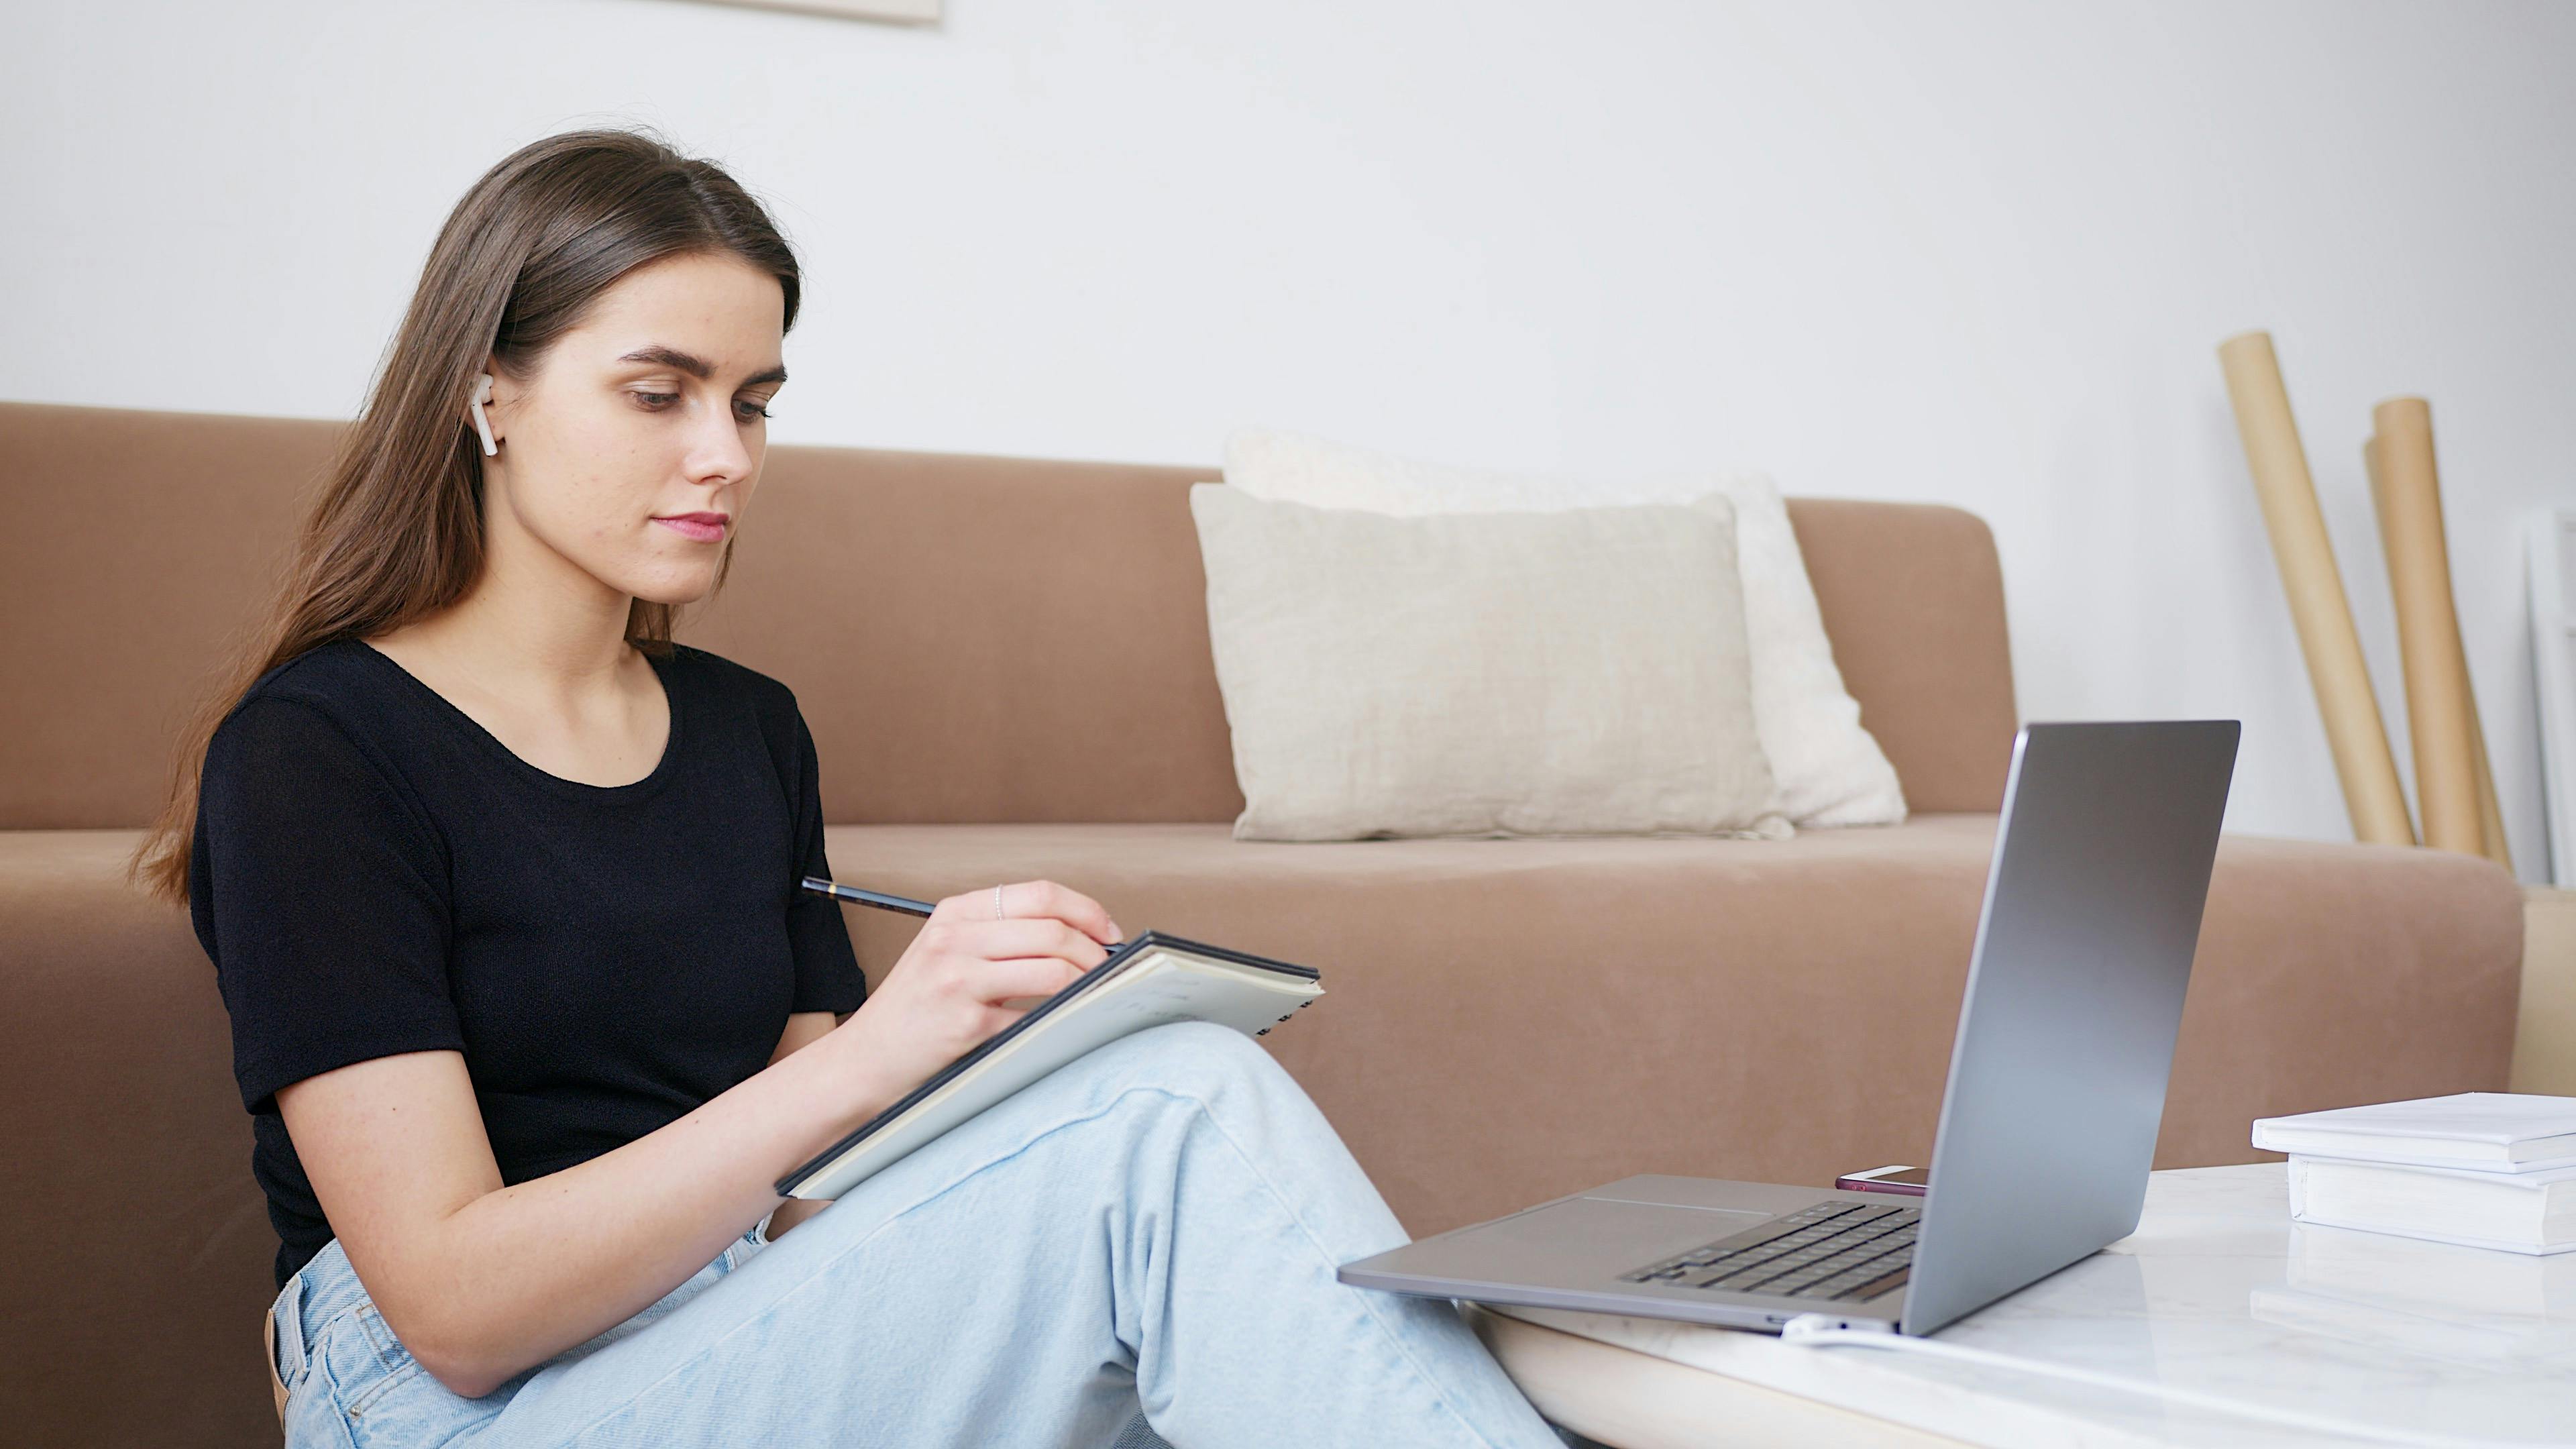 A white girl sits on the floor with a notebook resting on her bent knee. She is leaning against a tan couch. She is writing in her notebook with a computer open in front of her.